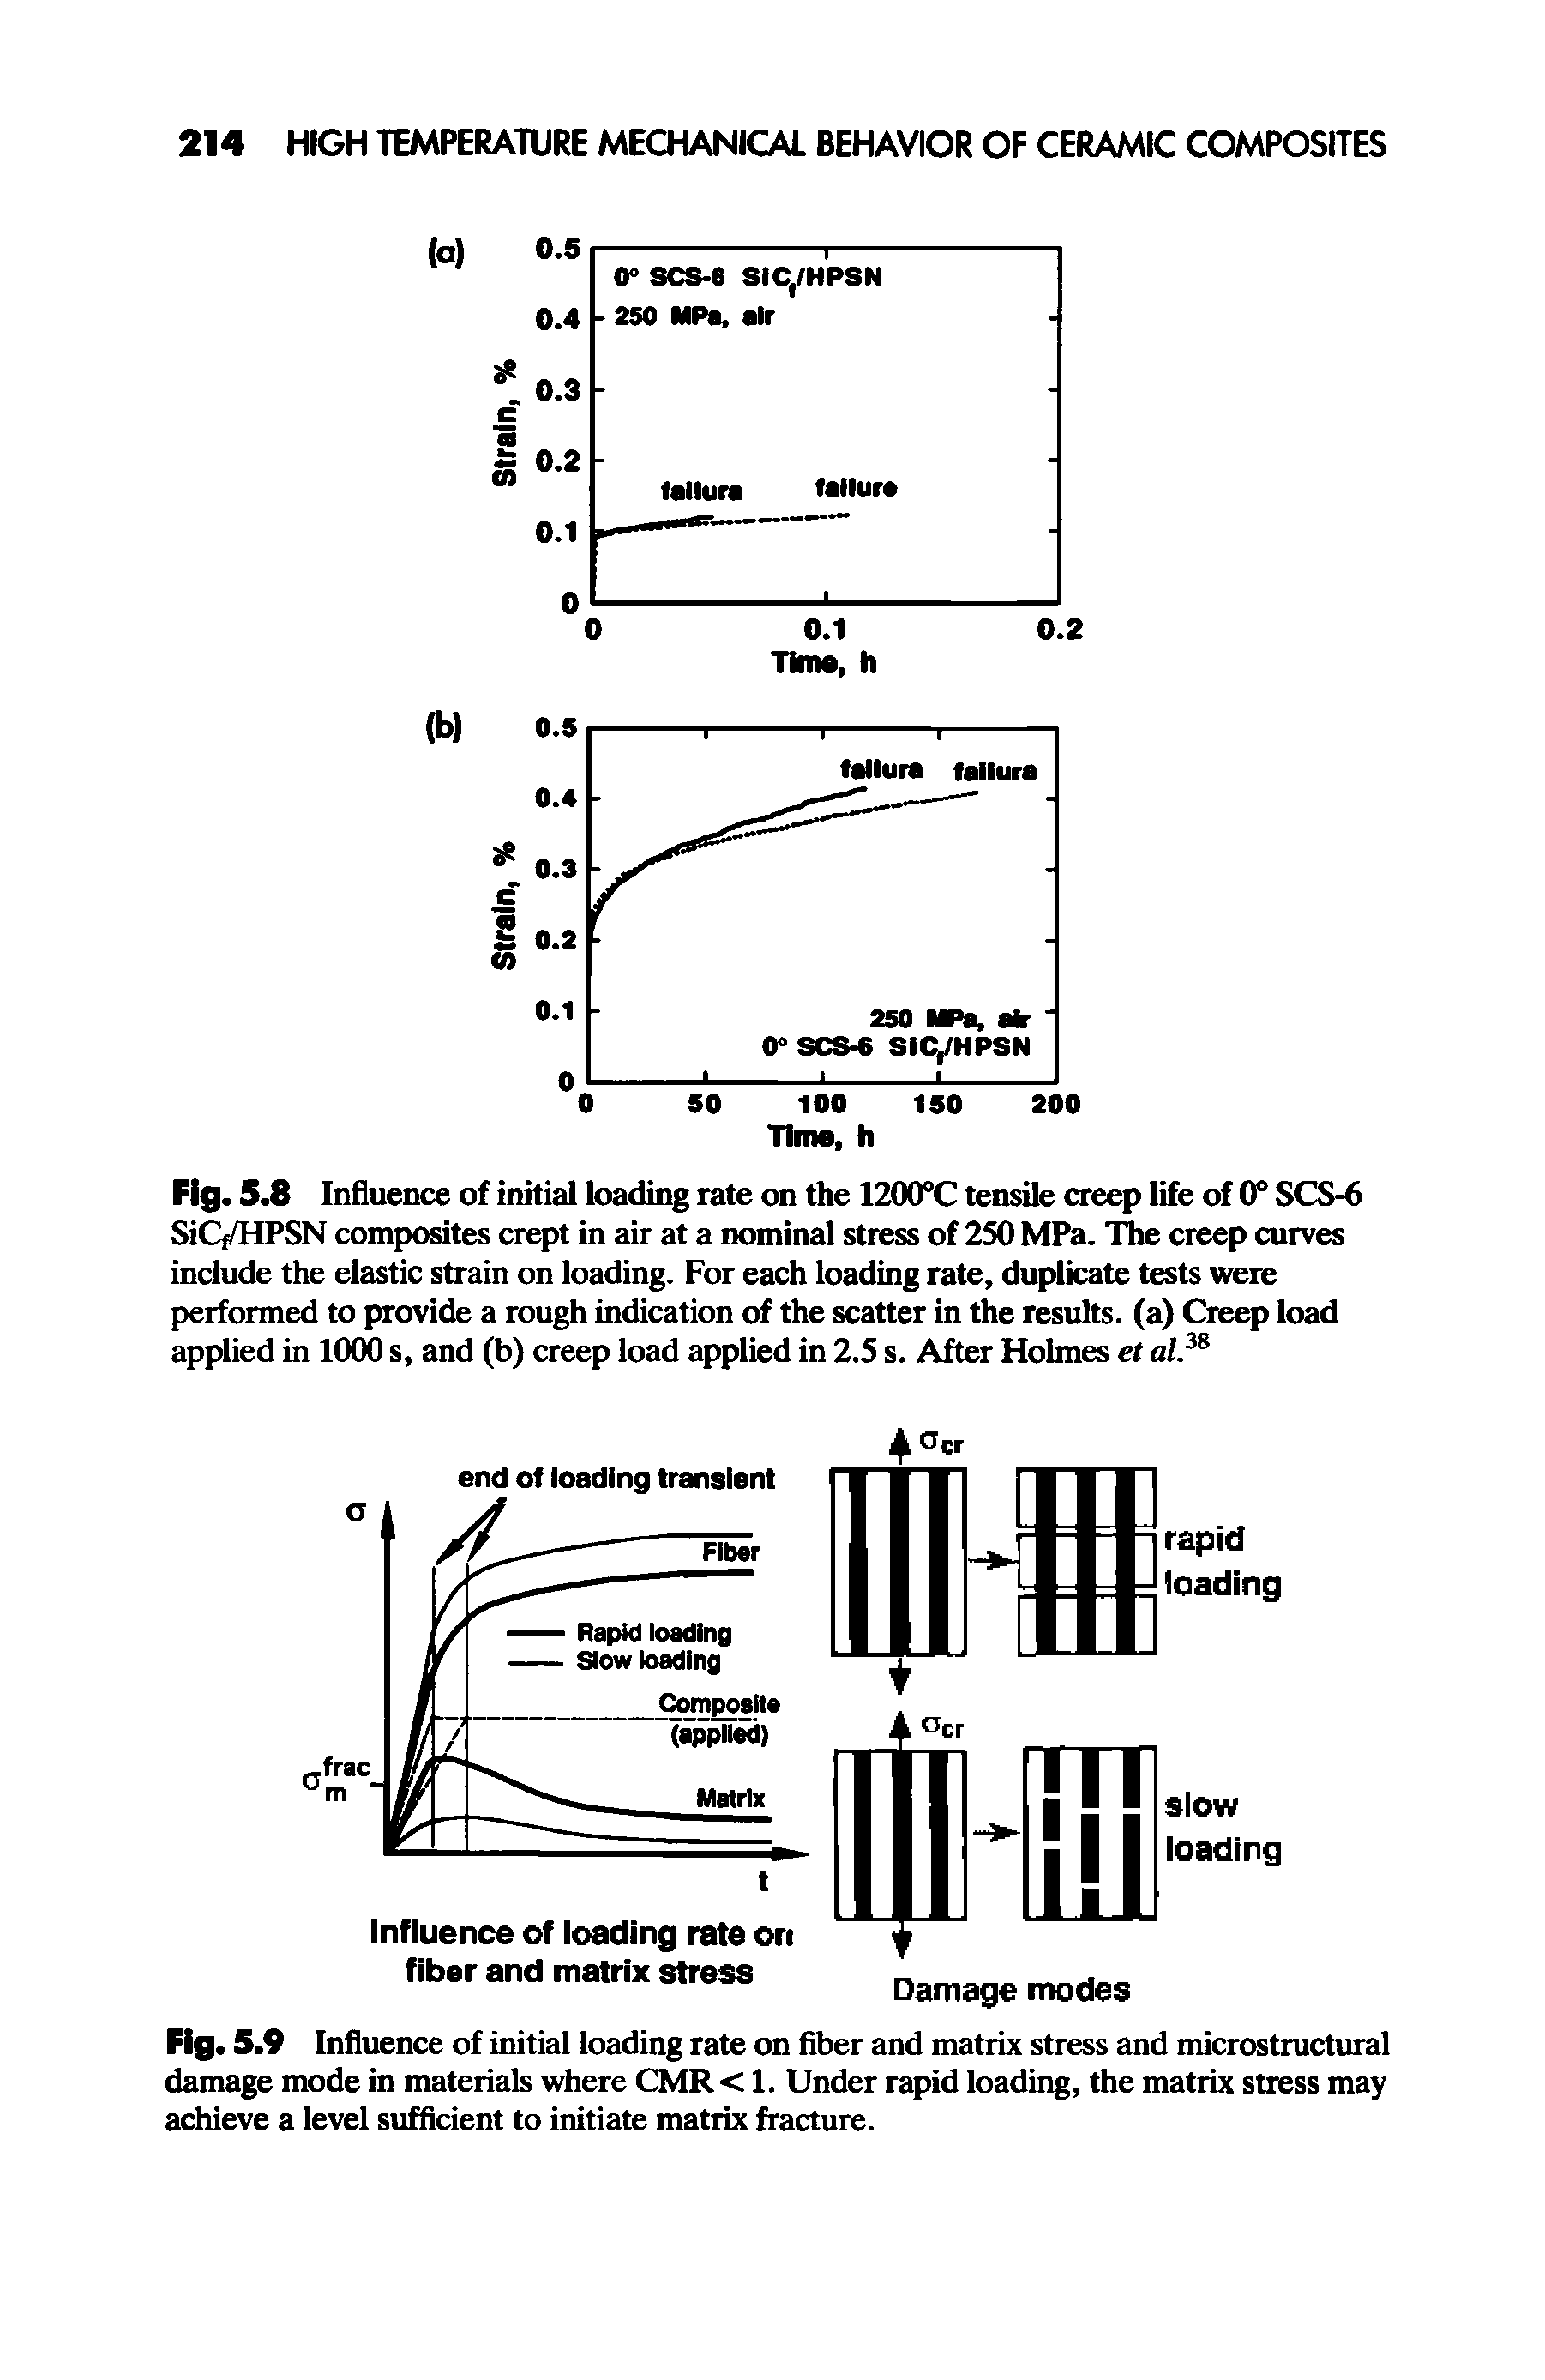 Fig. 5.8 Influence of initial loading rate on the 1200°C tensile creep life of 0° SCS-6 SiCf/HPSN composites crept in air at a nominal stress of 250 MPa. The creep curves include the elastic strain on loading. For each loading rate, duplicate tests were performed to provide a rough indication of the scatter in the results, (a) Creep load applied in 1000 s, and (b) creep load applied in 2.5 s. After Holmes et al.38...